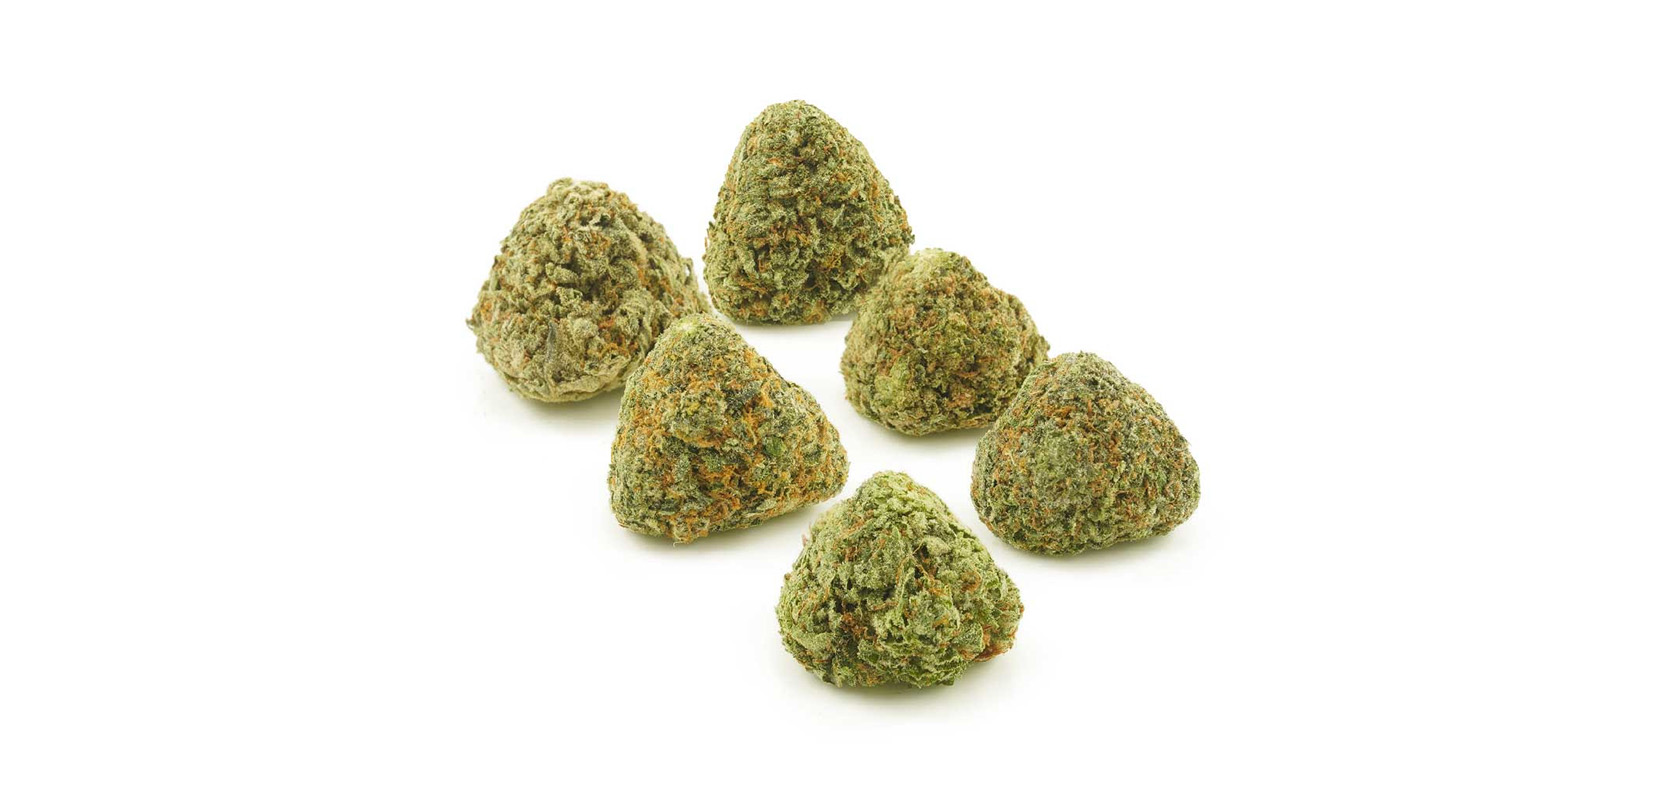 Buy Mystery - Cannabis Pack Oz at Wccannabis Online Shop